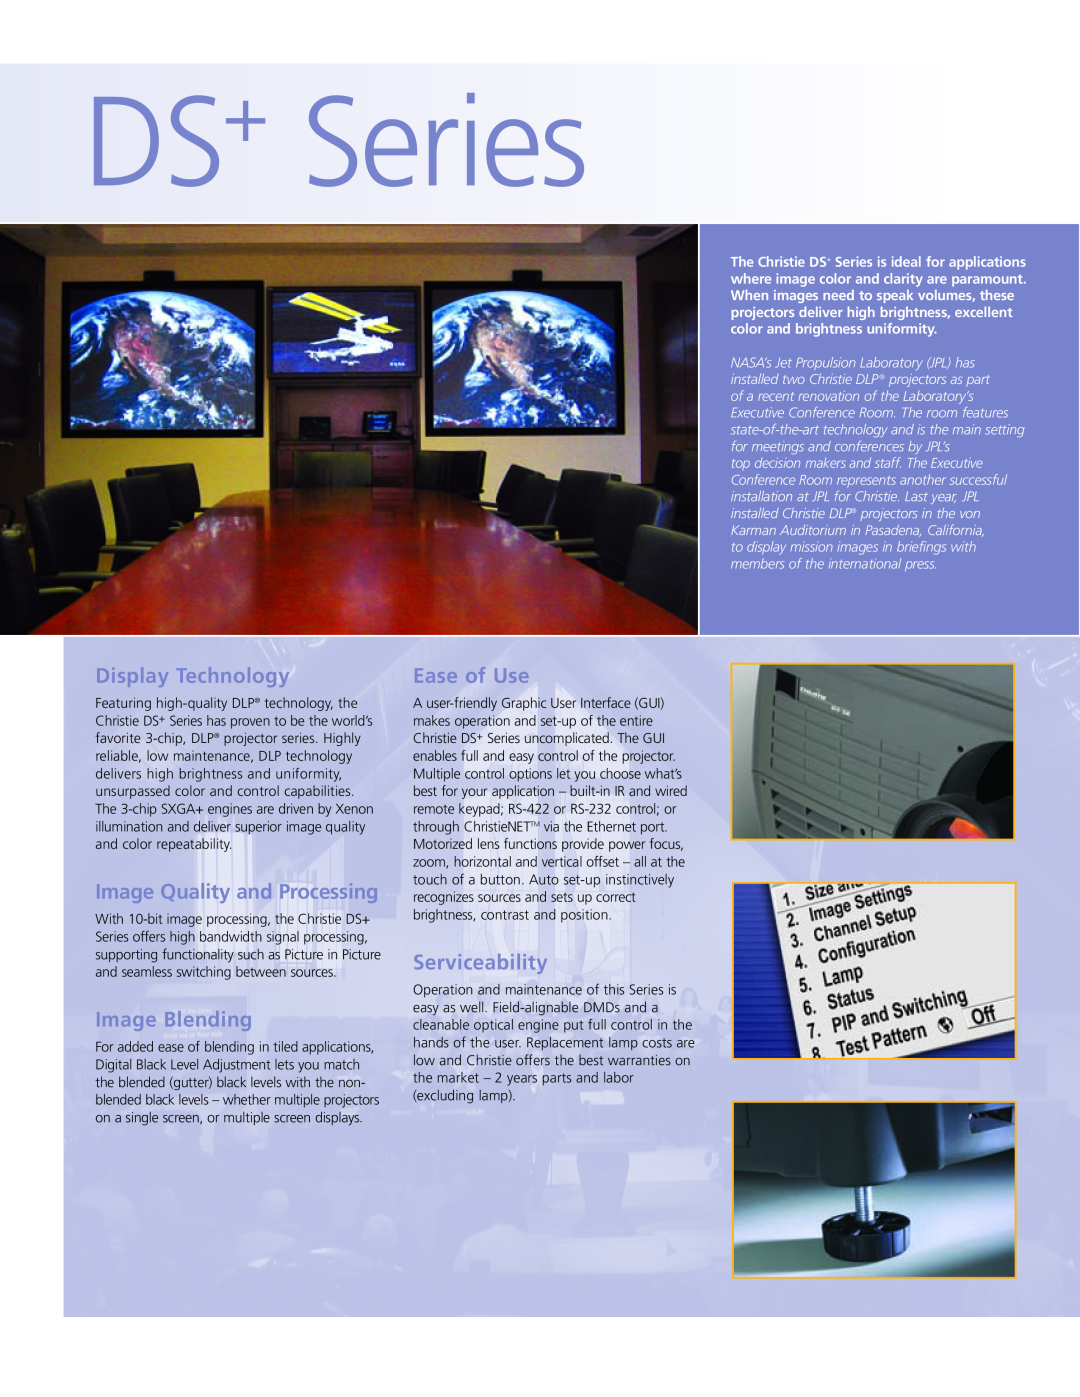 Christie Digital Systems DS+ Series manual Display Technology, Image Quality and Processing, Image Blending, Ease of Use 